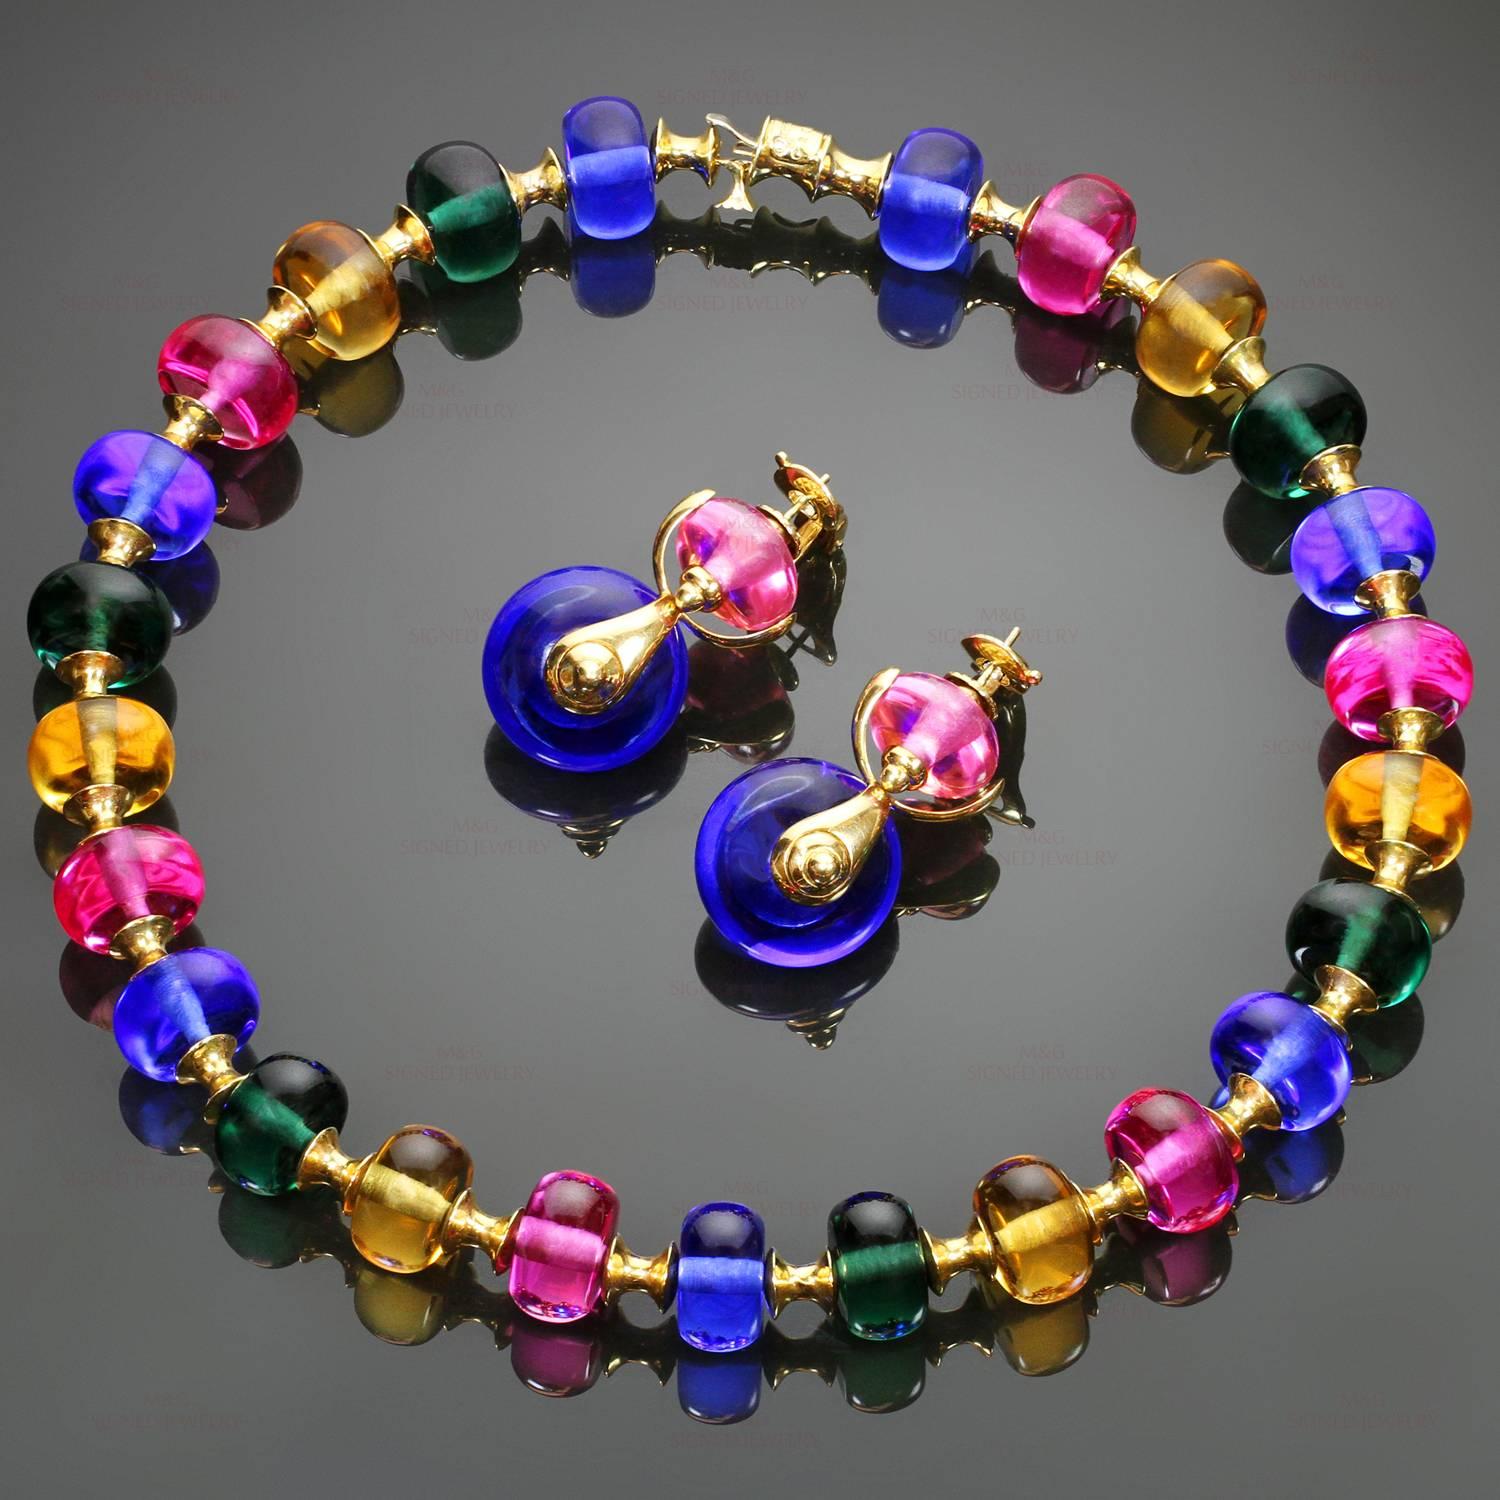 This fabulous jewelry set from Marina B's colorful Cimin collection is crafted in 18k yellow gold and features a necklace designed as a series of polished beads in blue, green, yellow, & pink quartz, connected by tapered barrel-shaped links and